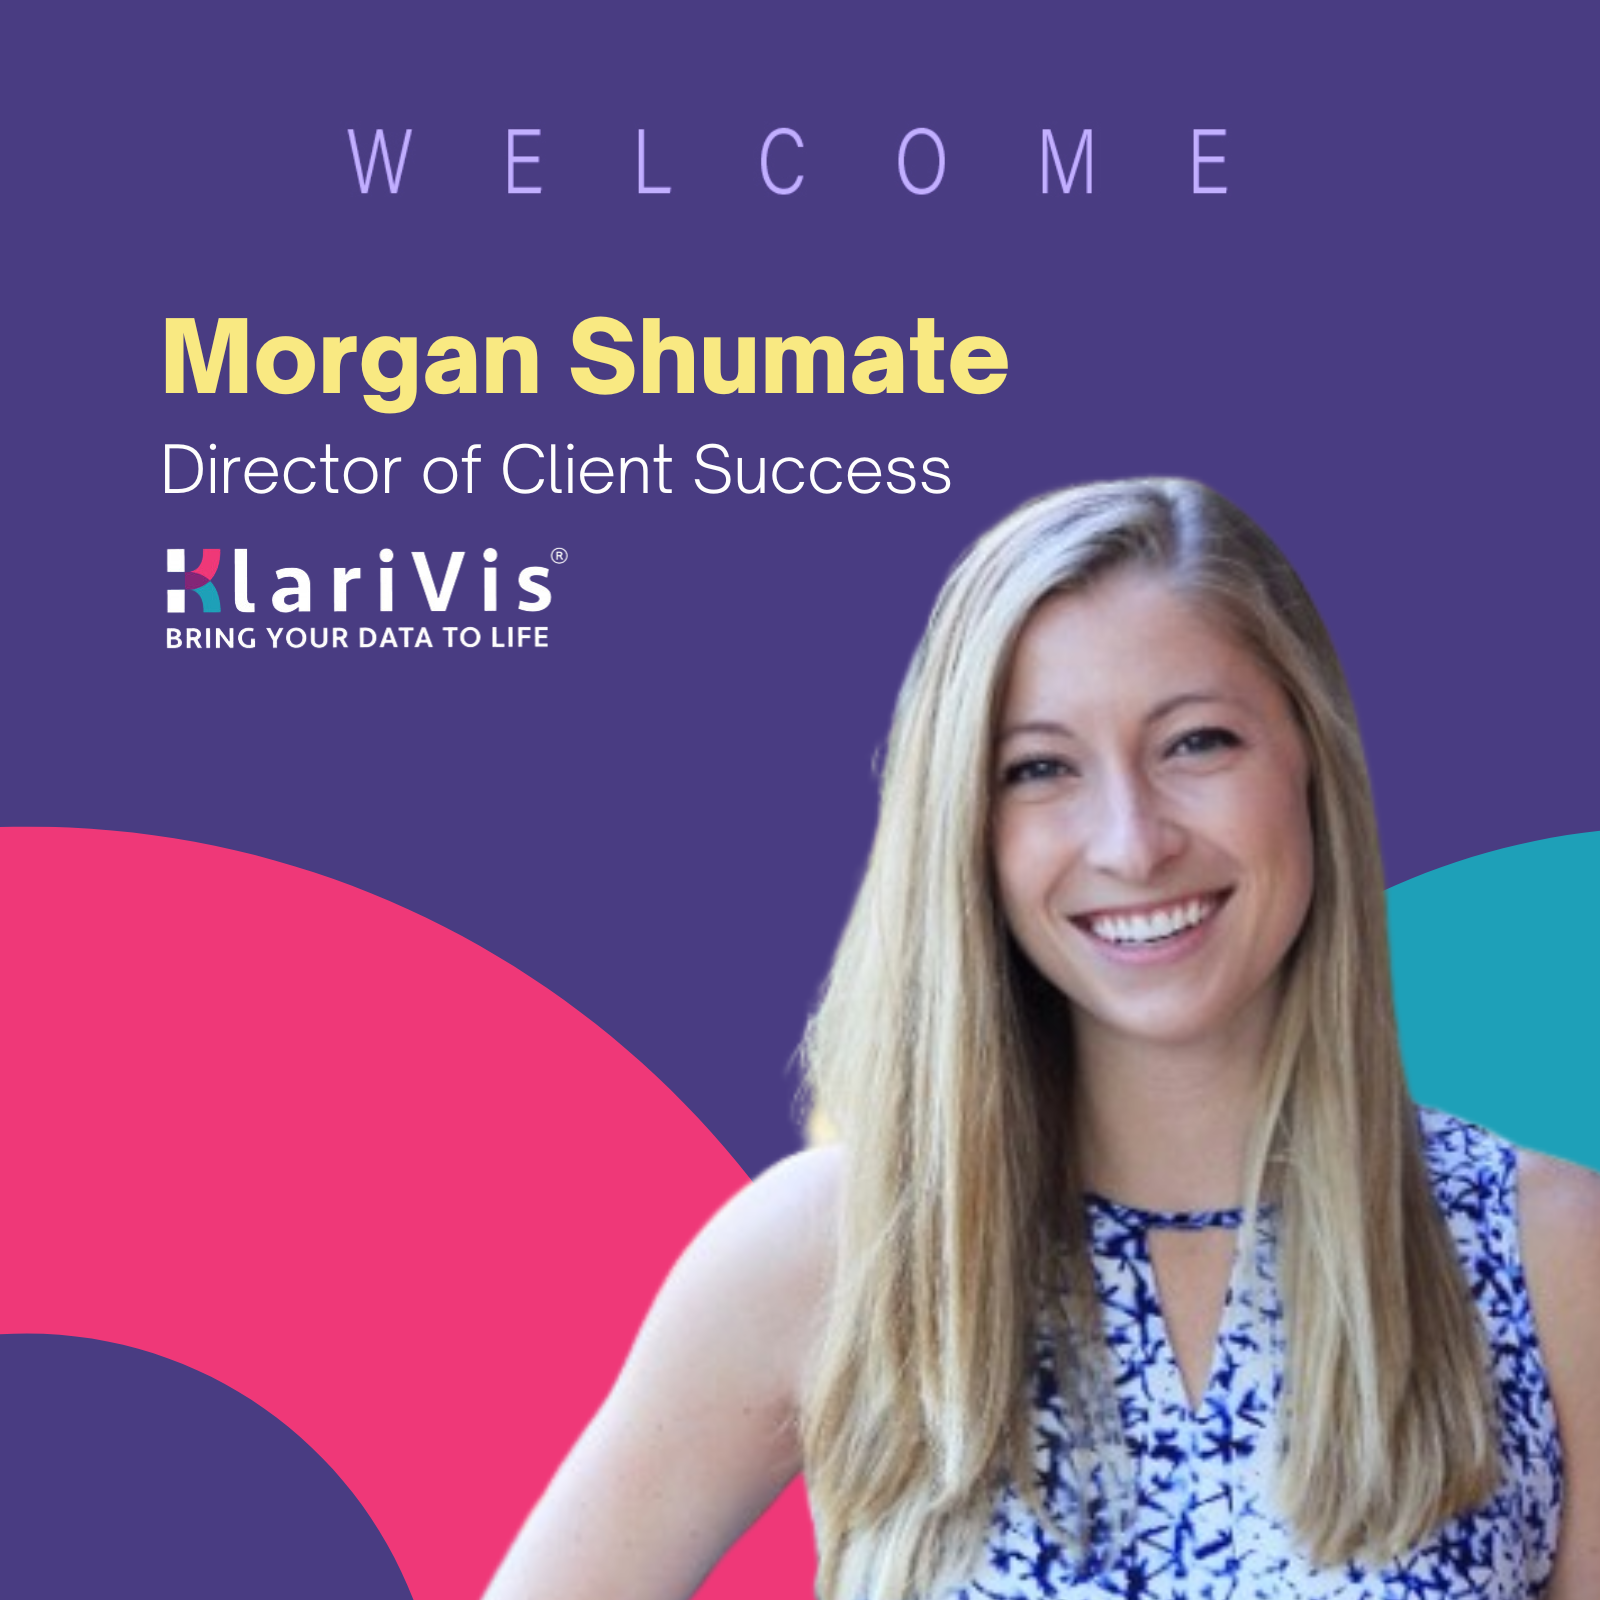 Morgan Shumate hired as Director of Client Success